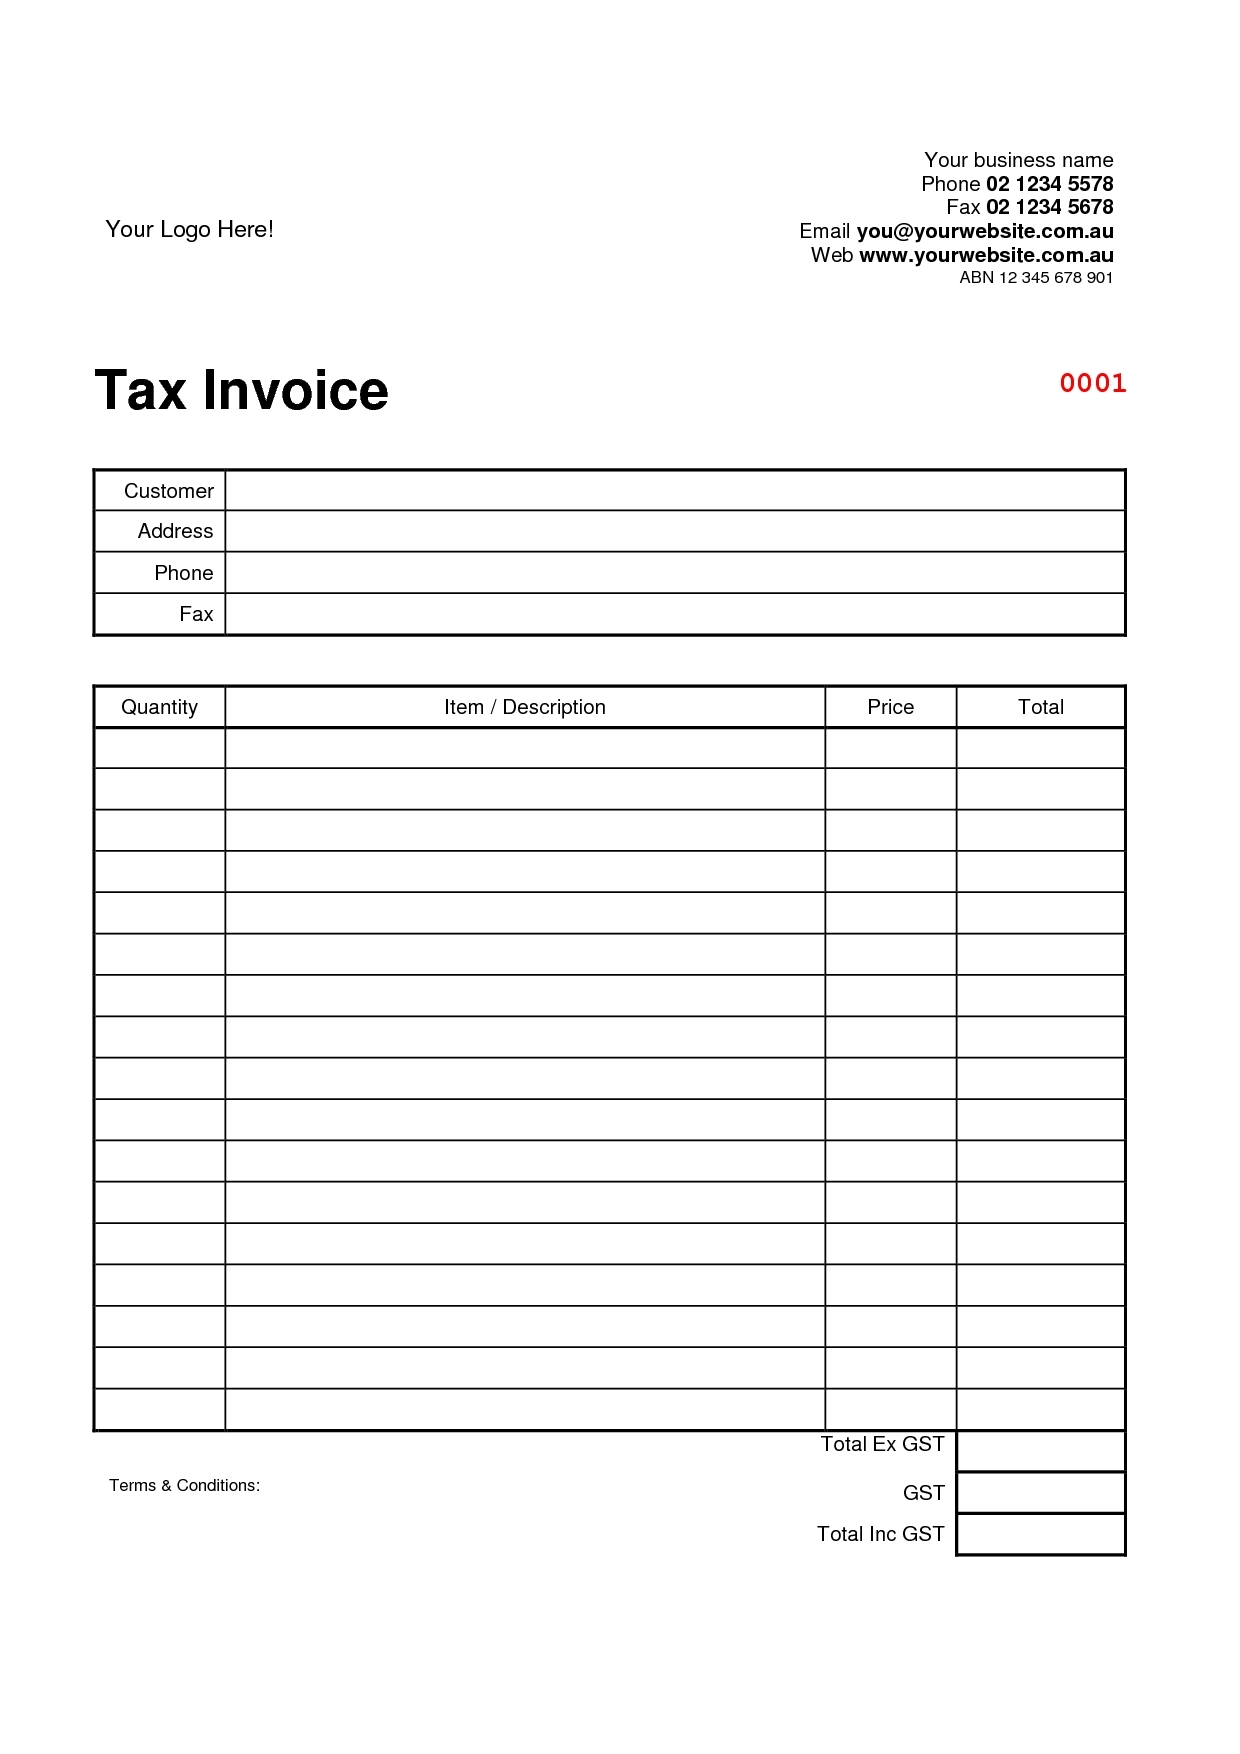 tax invoice layout tax invoice template word doc invoice example 1240 X 1754